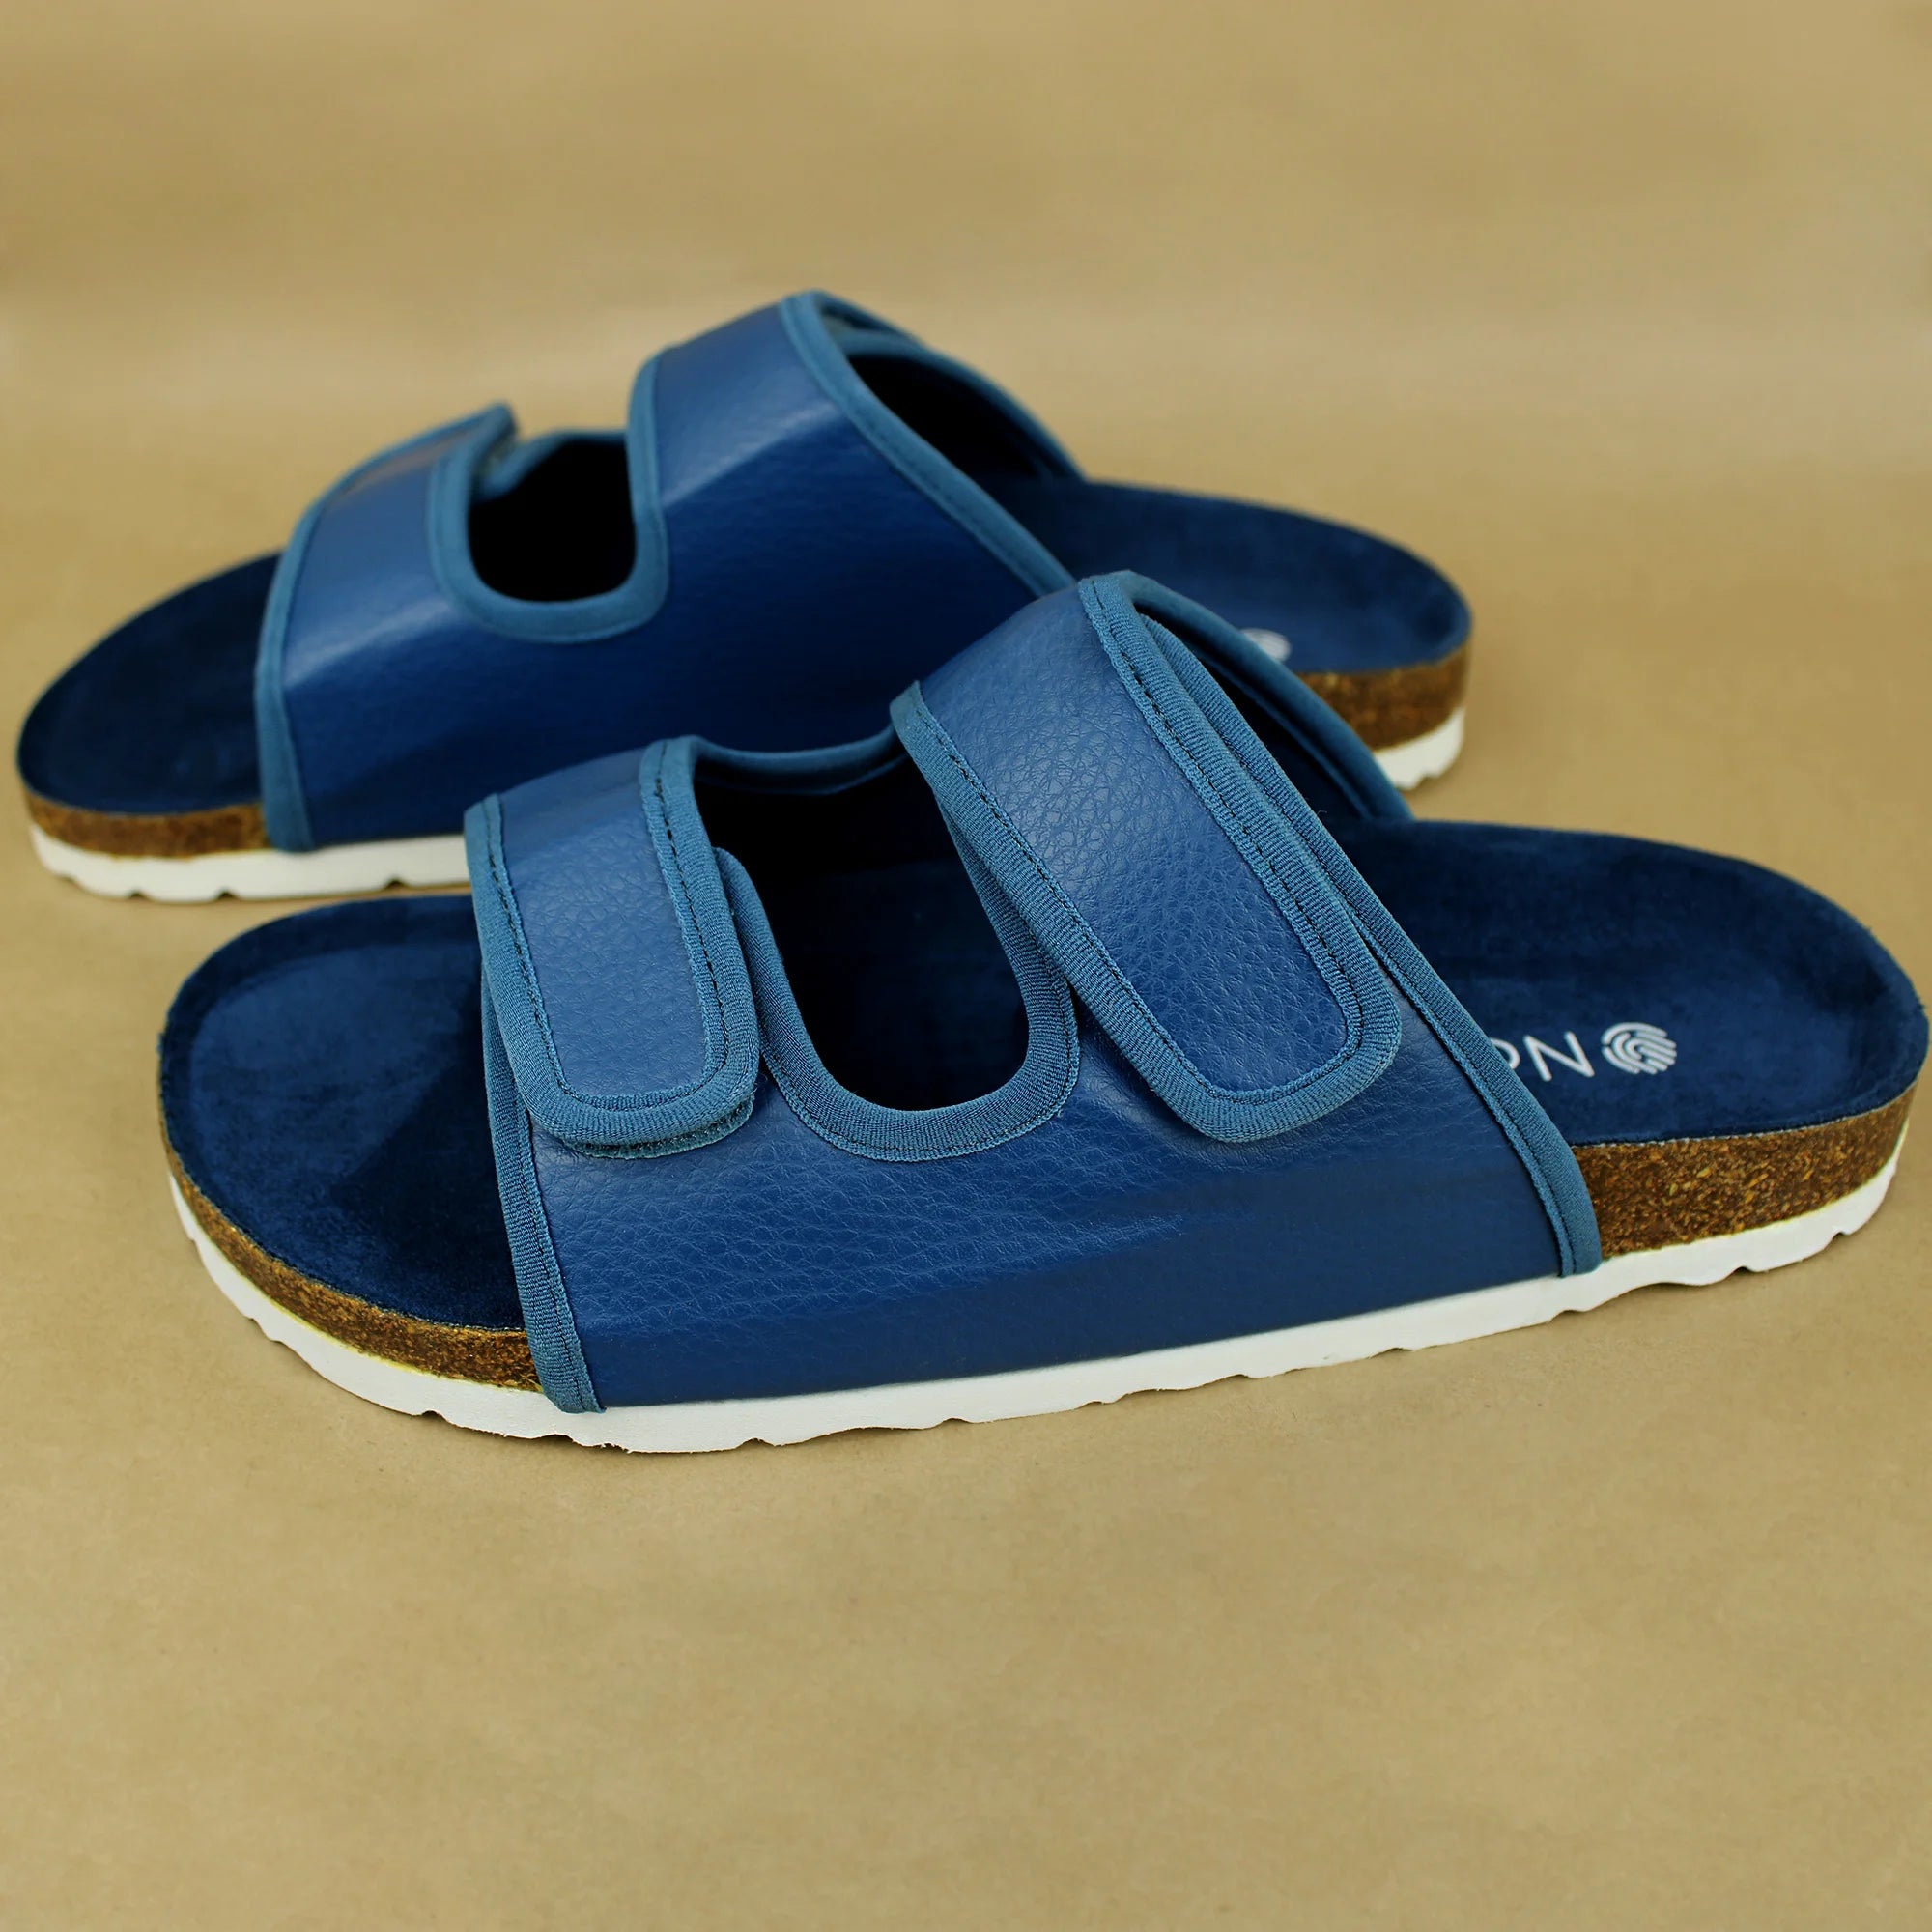 Touch-Fastening Sandals for Boys, Designed for Autonomy - blue, Shoes